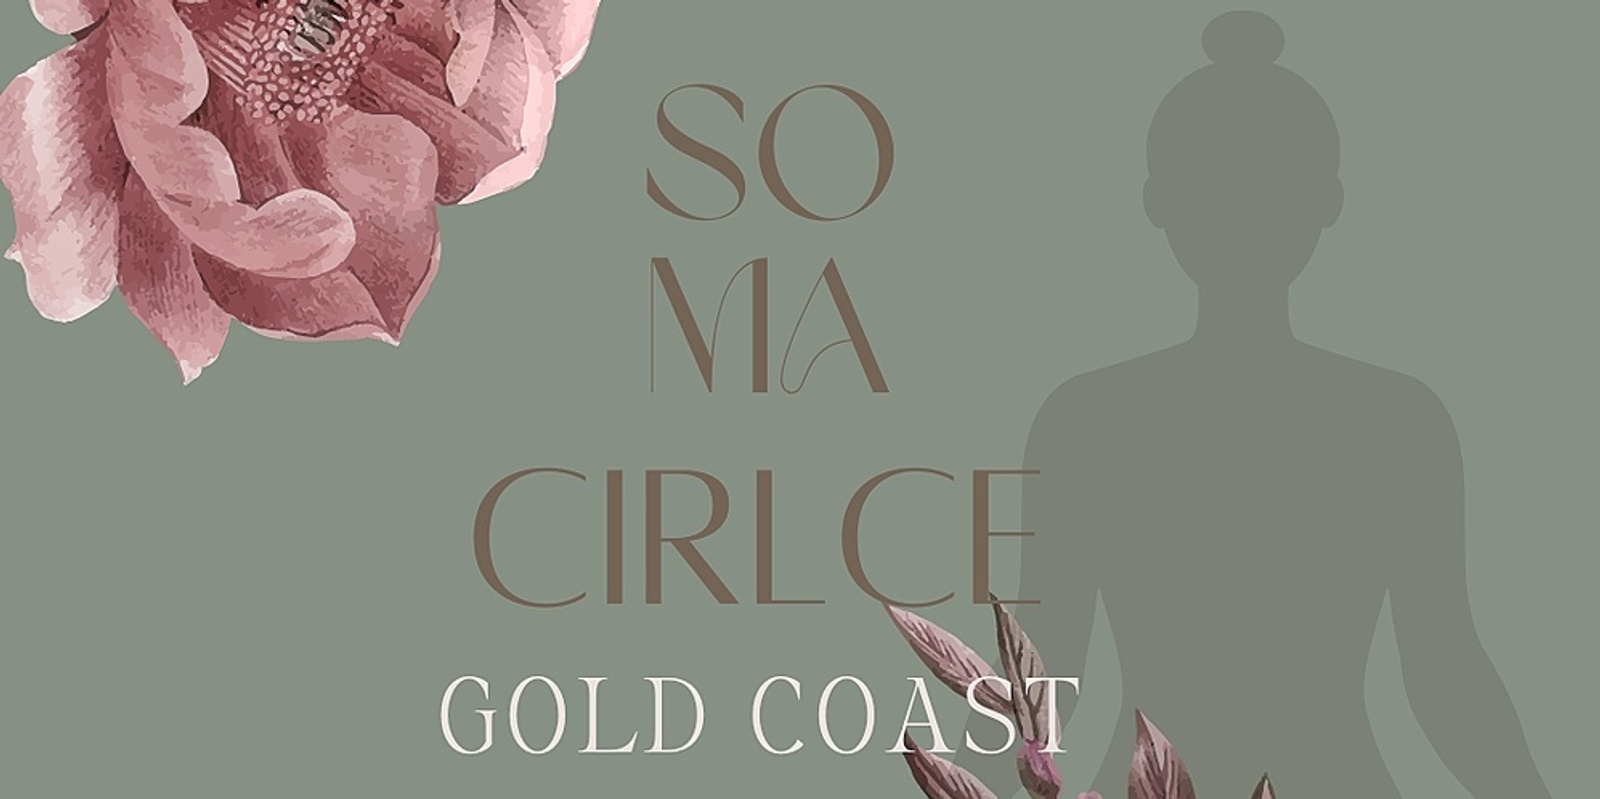 Banner image for SOMA CIRLCE GOLD COAST